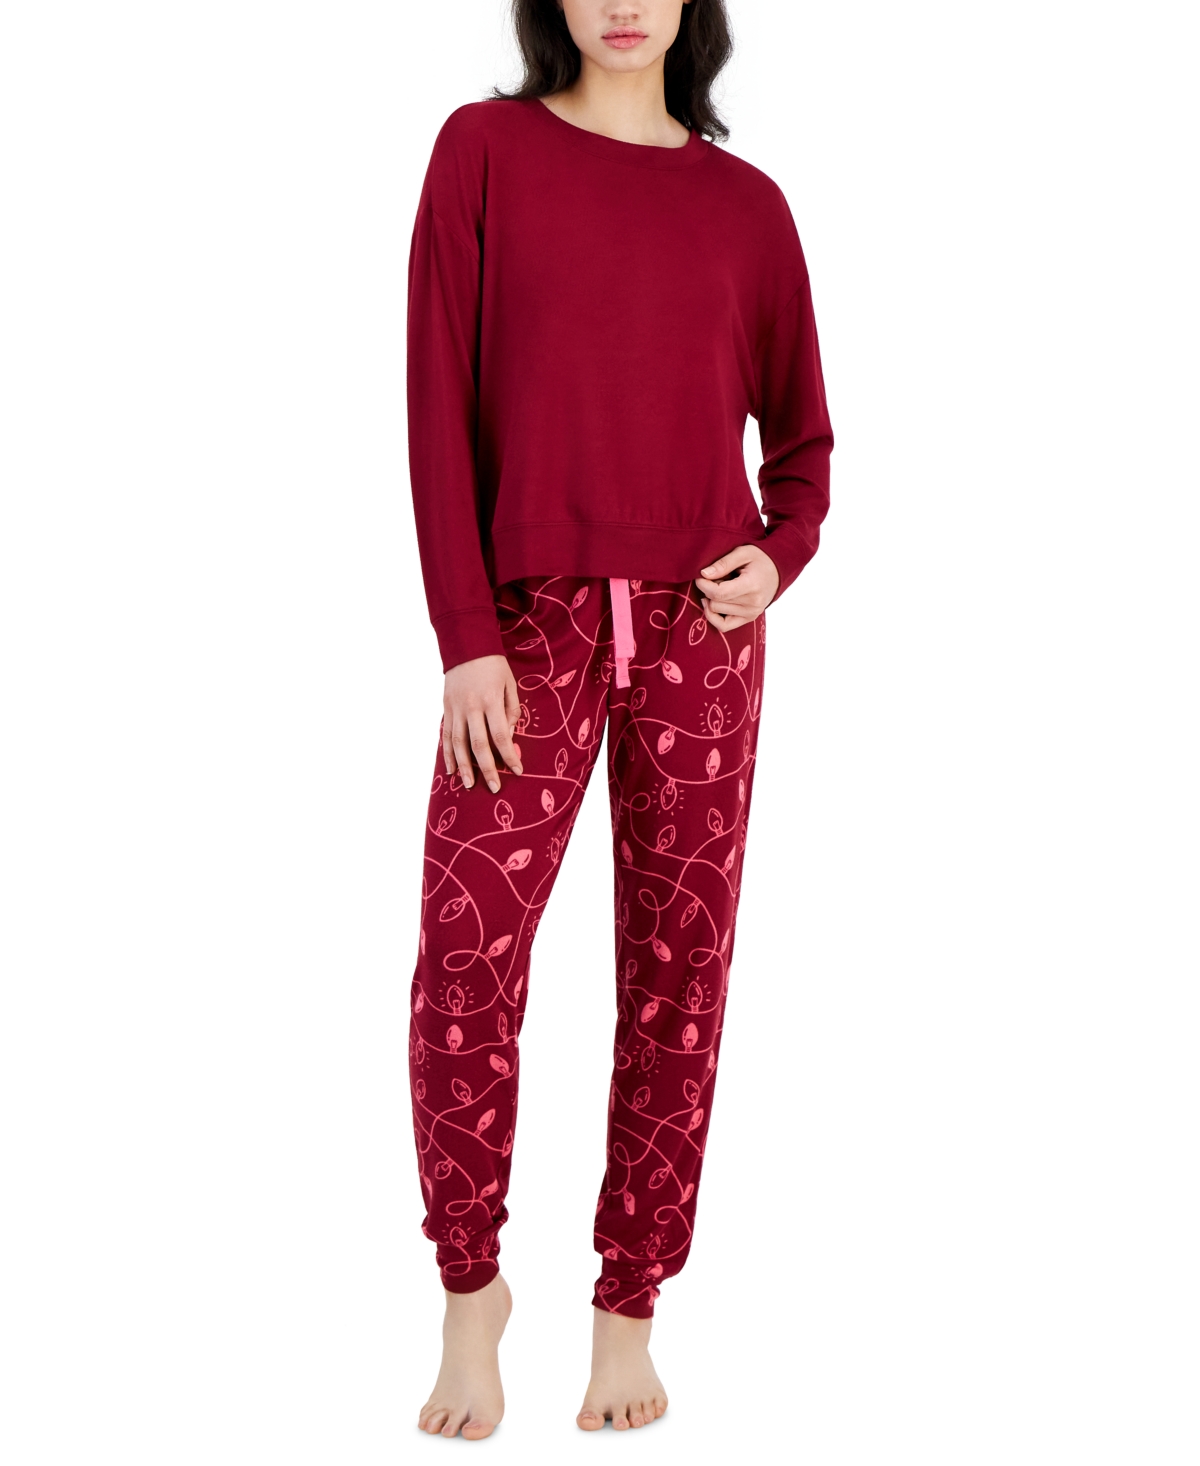 Women's 2-Pc. Long-Sleeve Packaged Pajamas Set, Created for Macy's - Xmas Light Smpl